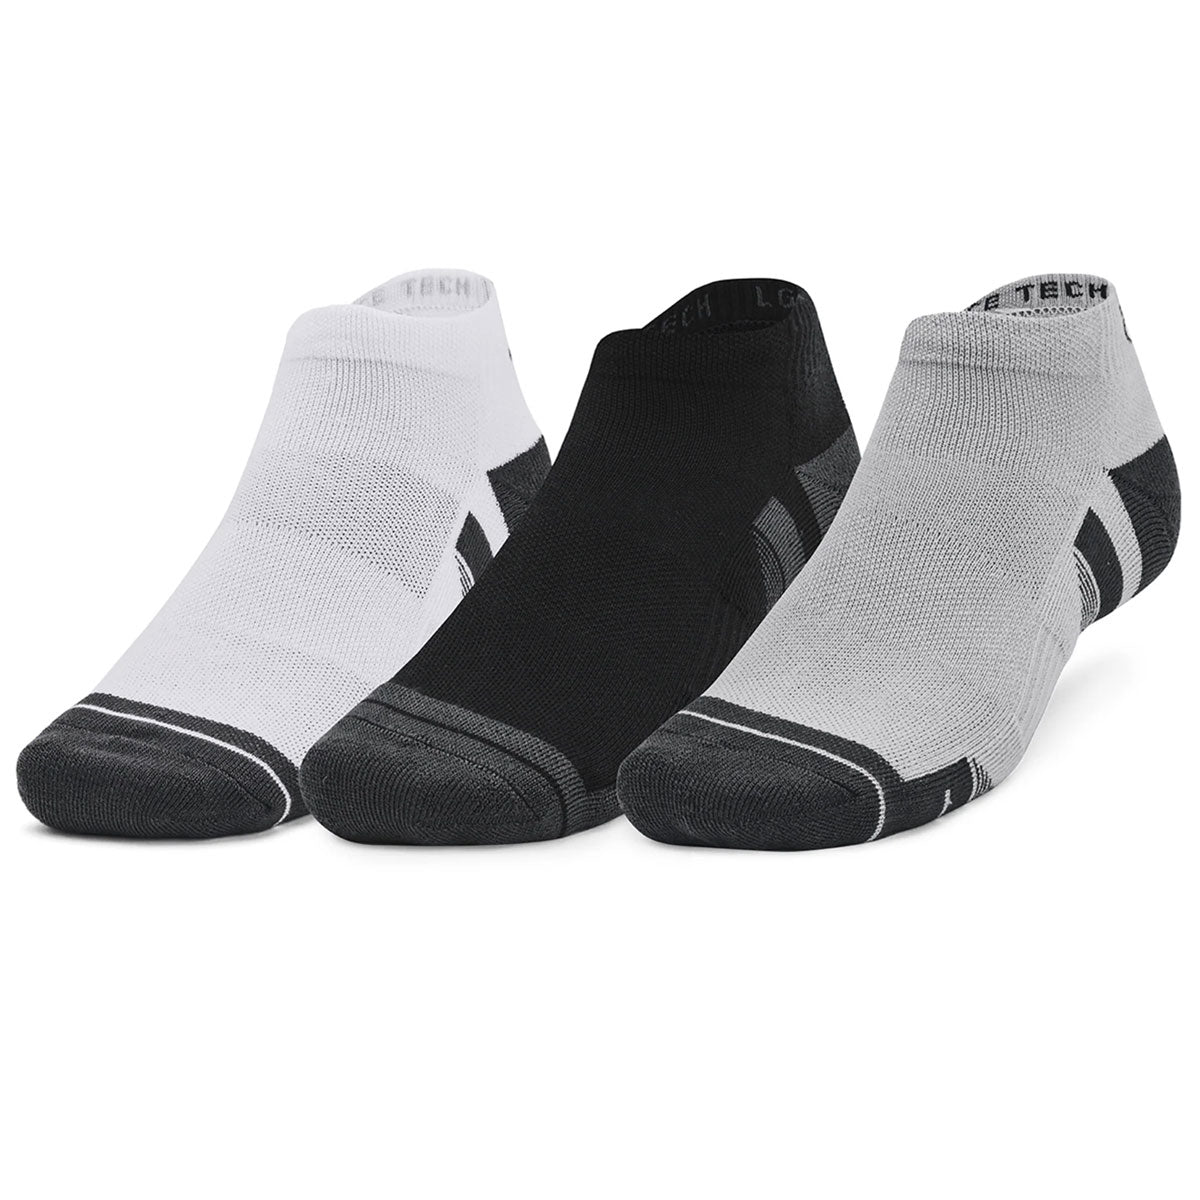 Under Armour Performance Tech 3 Pack Low Socks - Adult - Grey